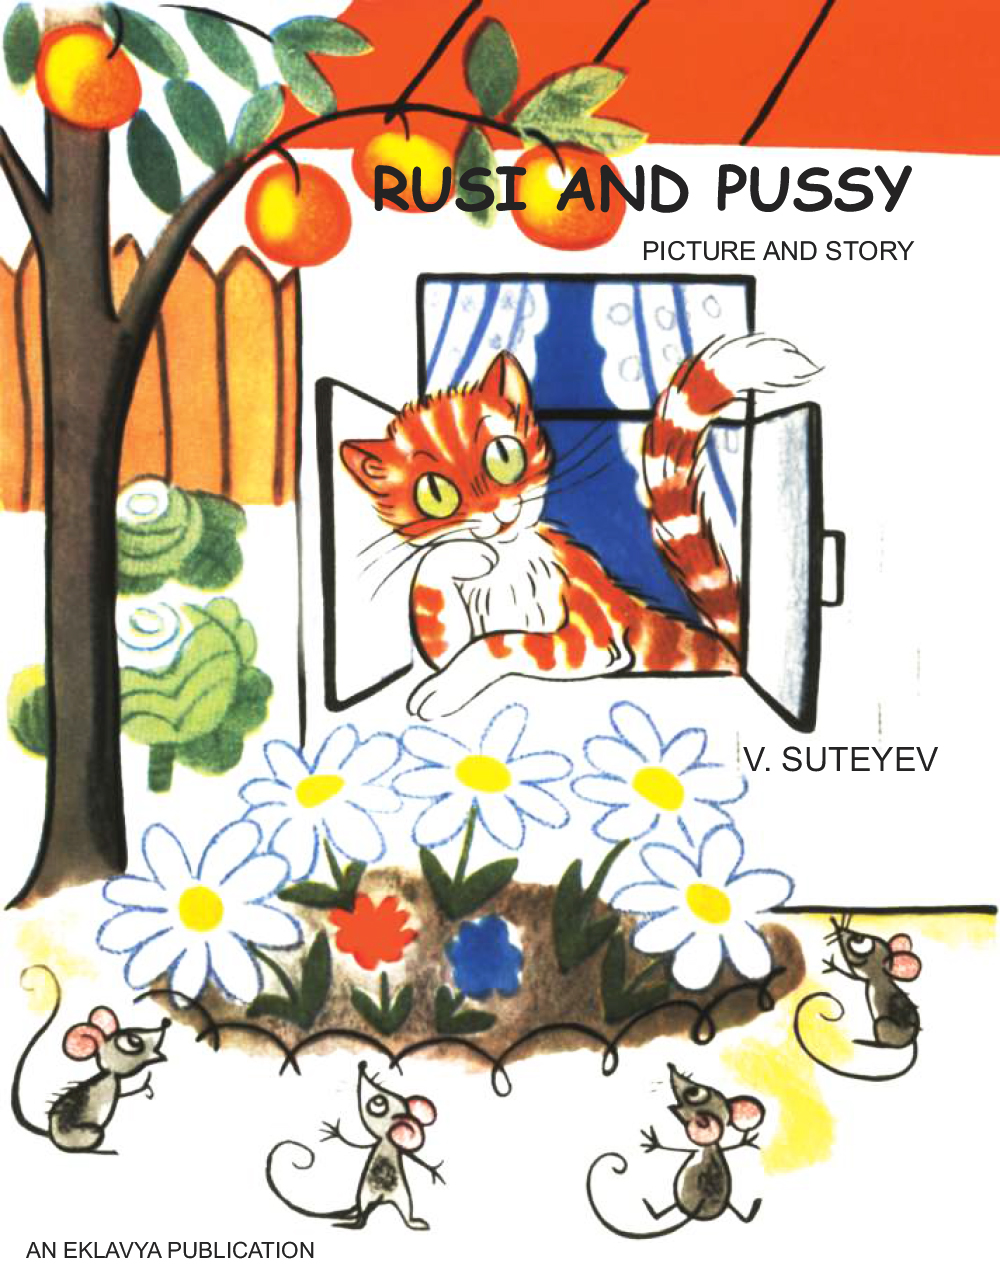 Rusi and Pussy